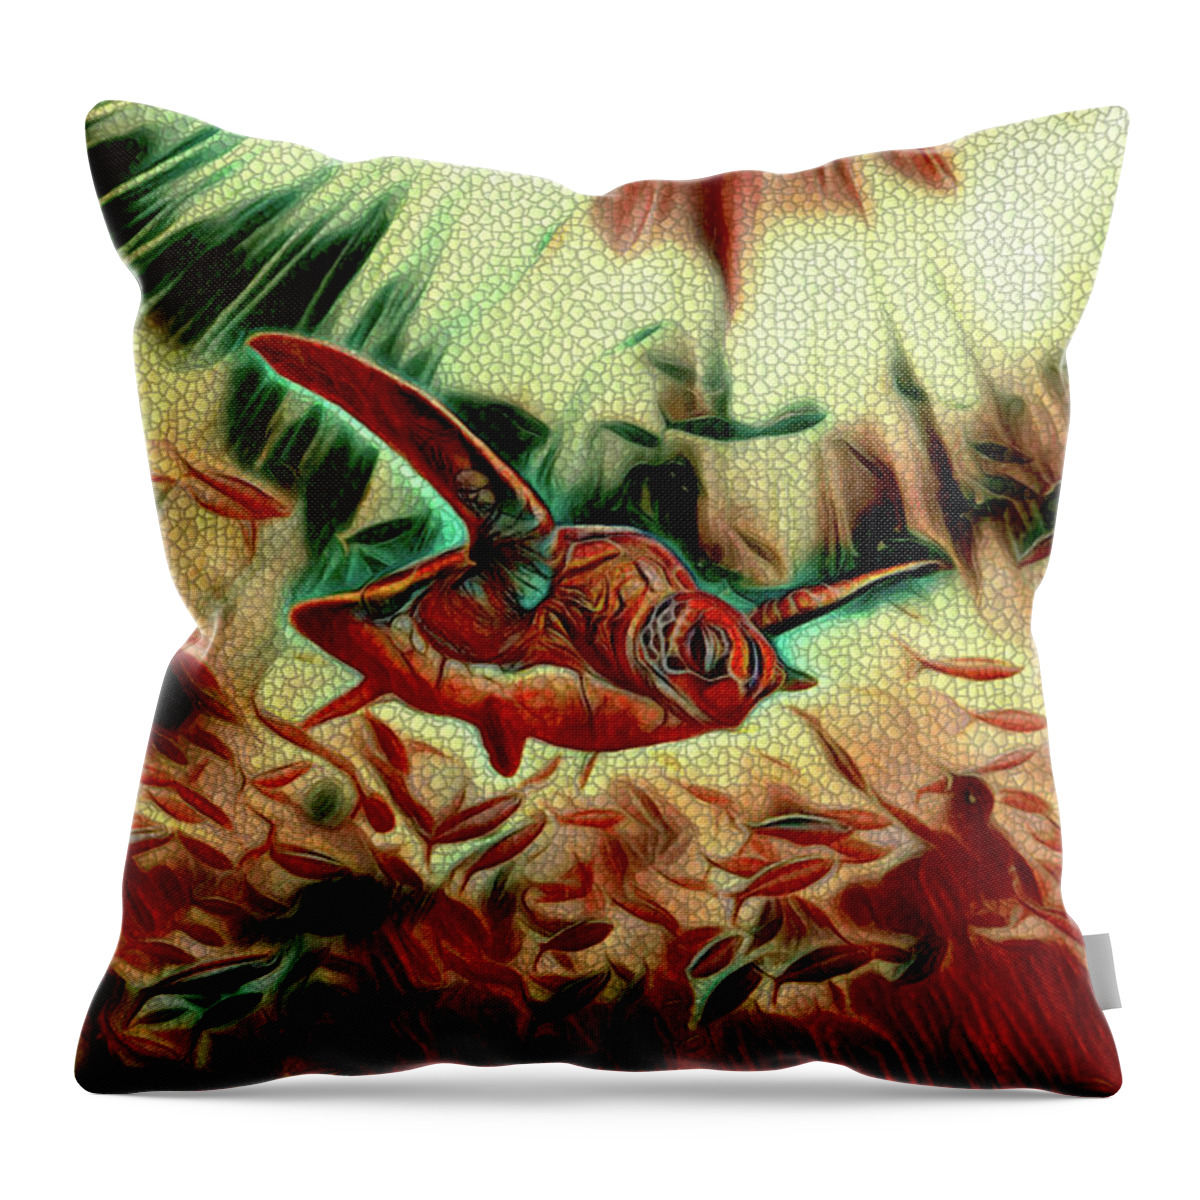 Surreal Throw Pillow featuring the digital art Surreal Sea Turtle Swimming with Fish Mosaic by Shelli Fitzpatrick